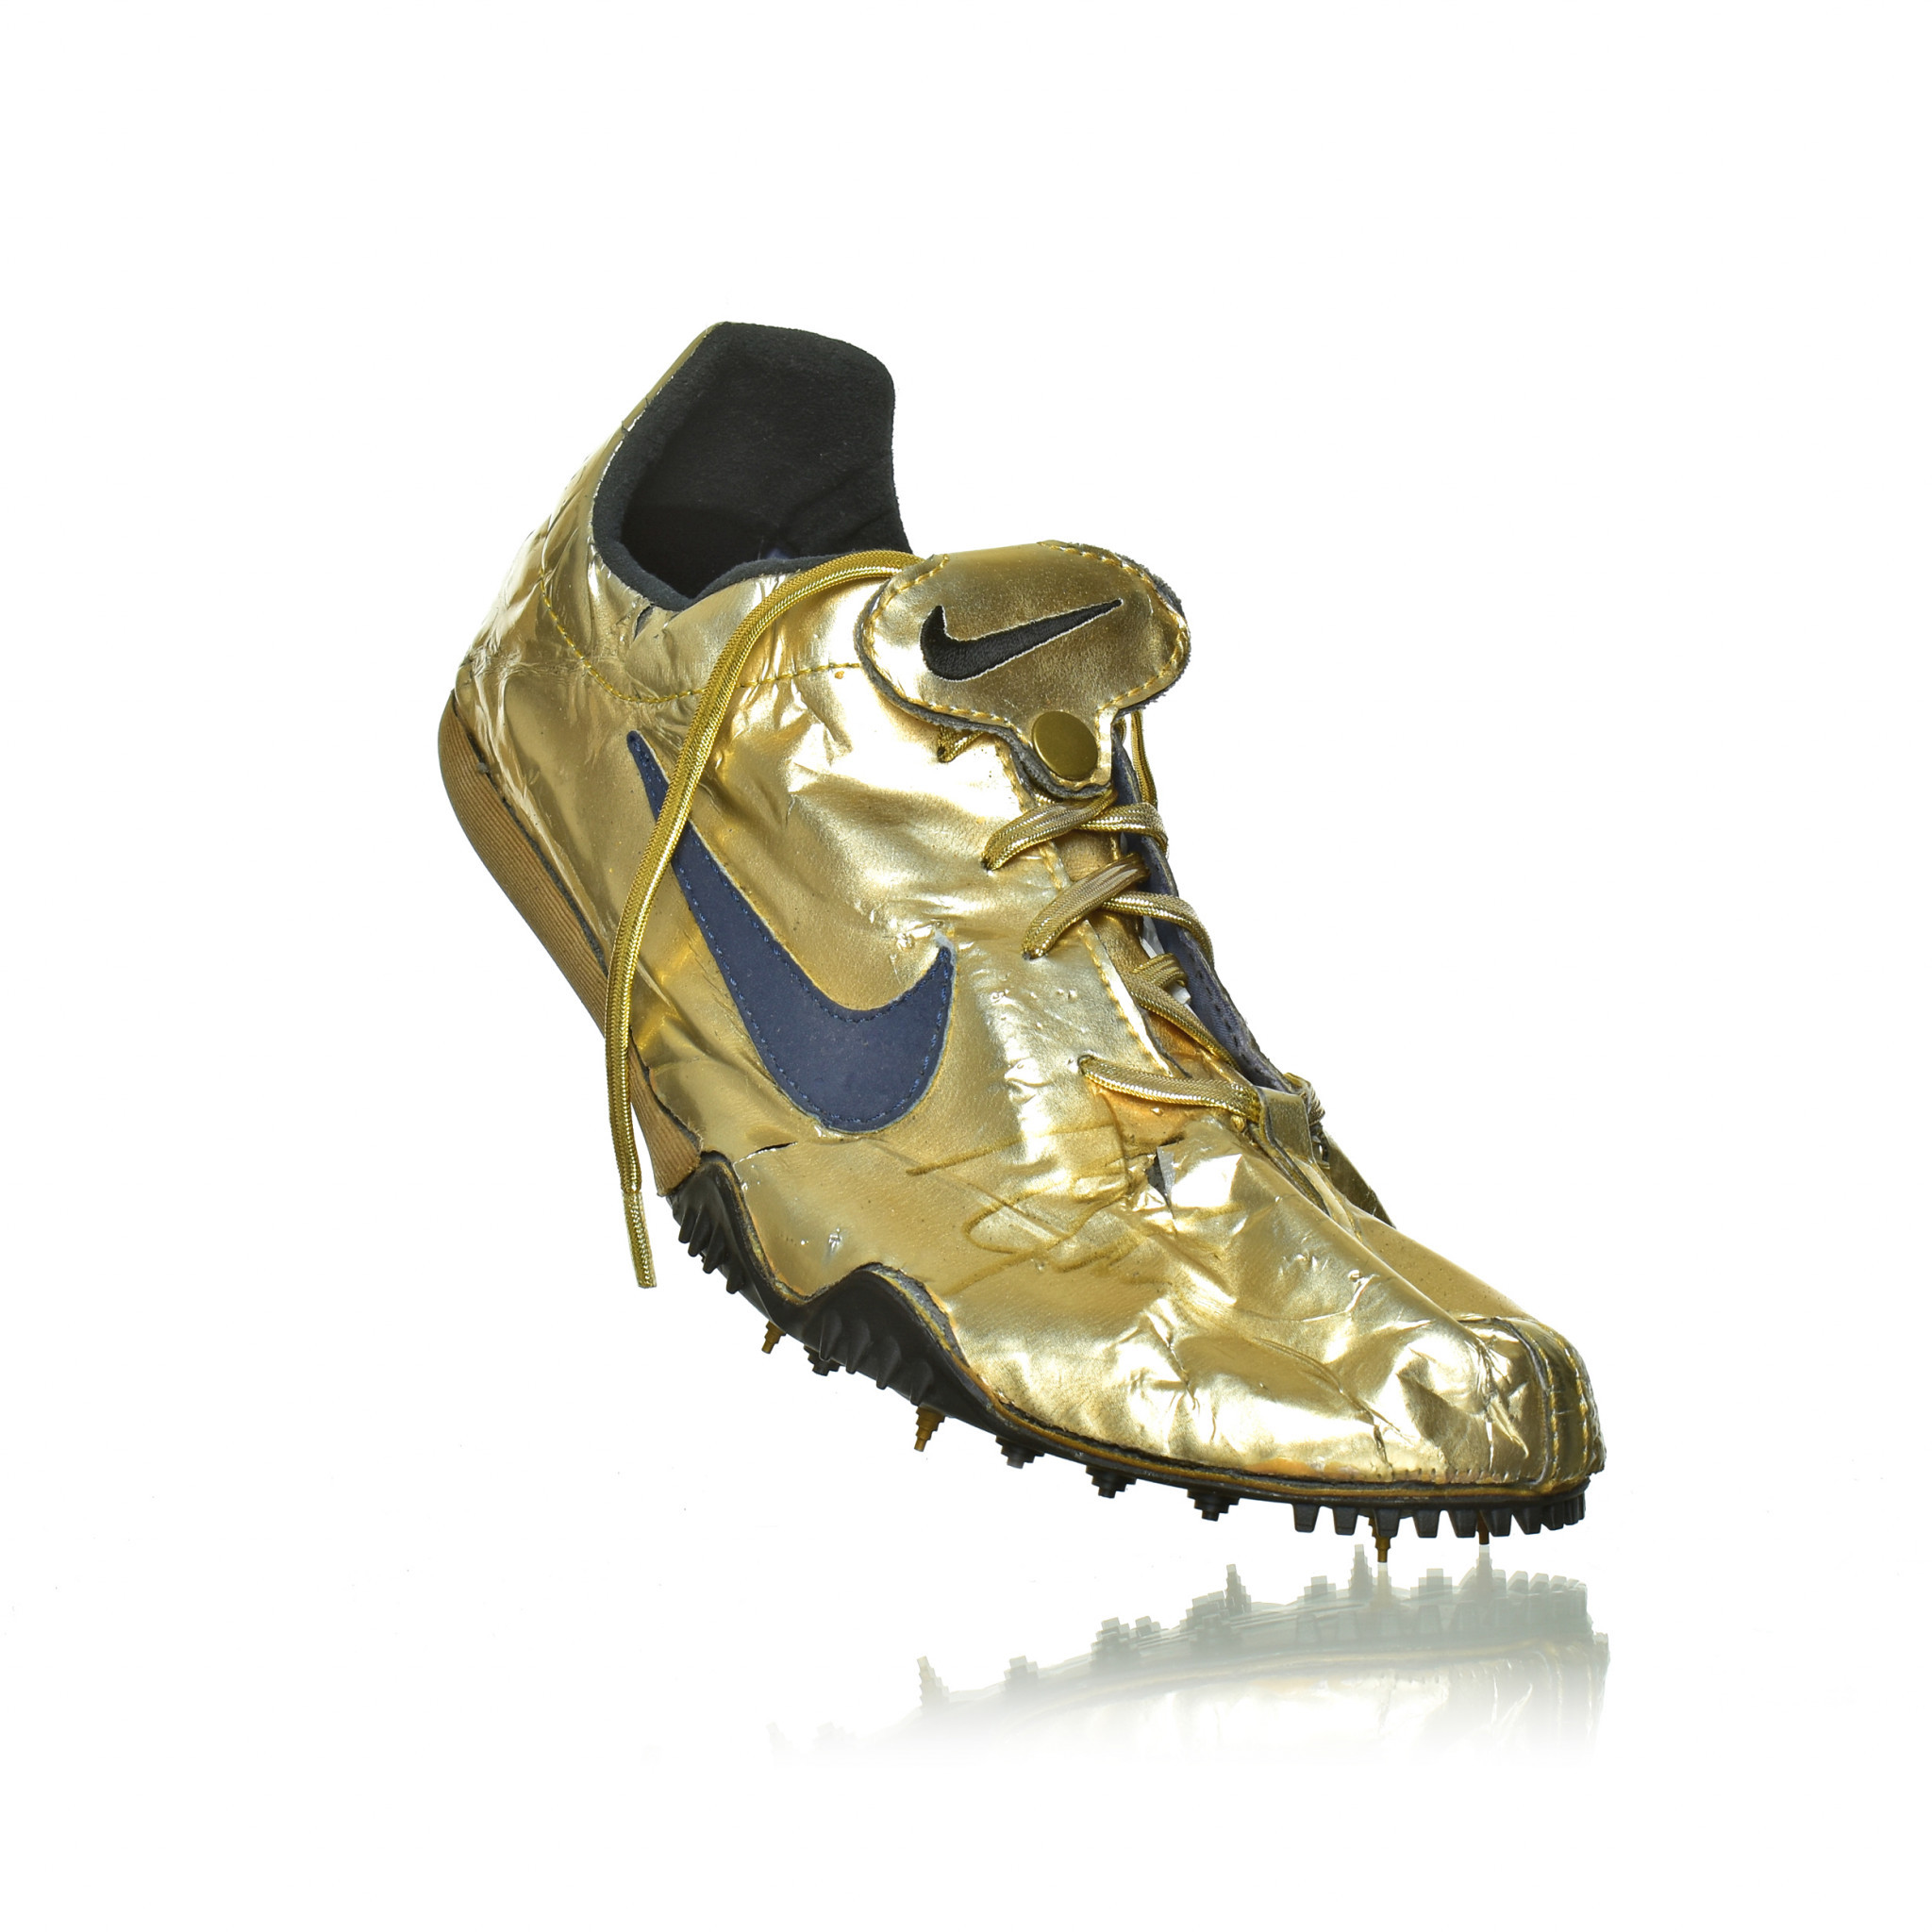 Johnson’s iconic golden spikes to join the World Athletics Heritage Collection